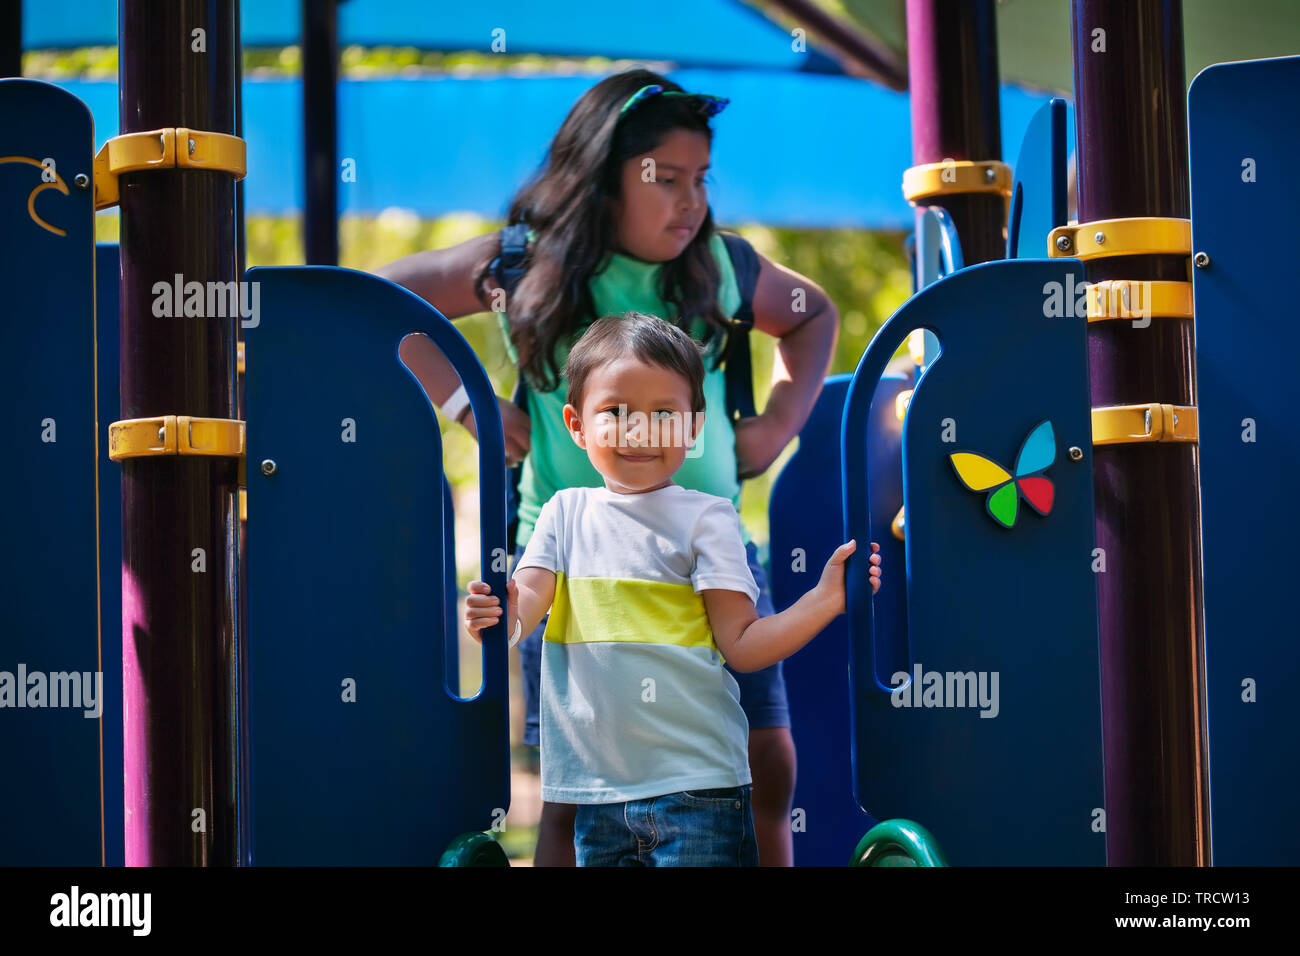 Young boy 3 years of age is standing and holding on to playground slide with older sister standing behind to help. Stock Photo